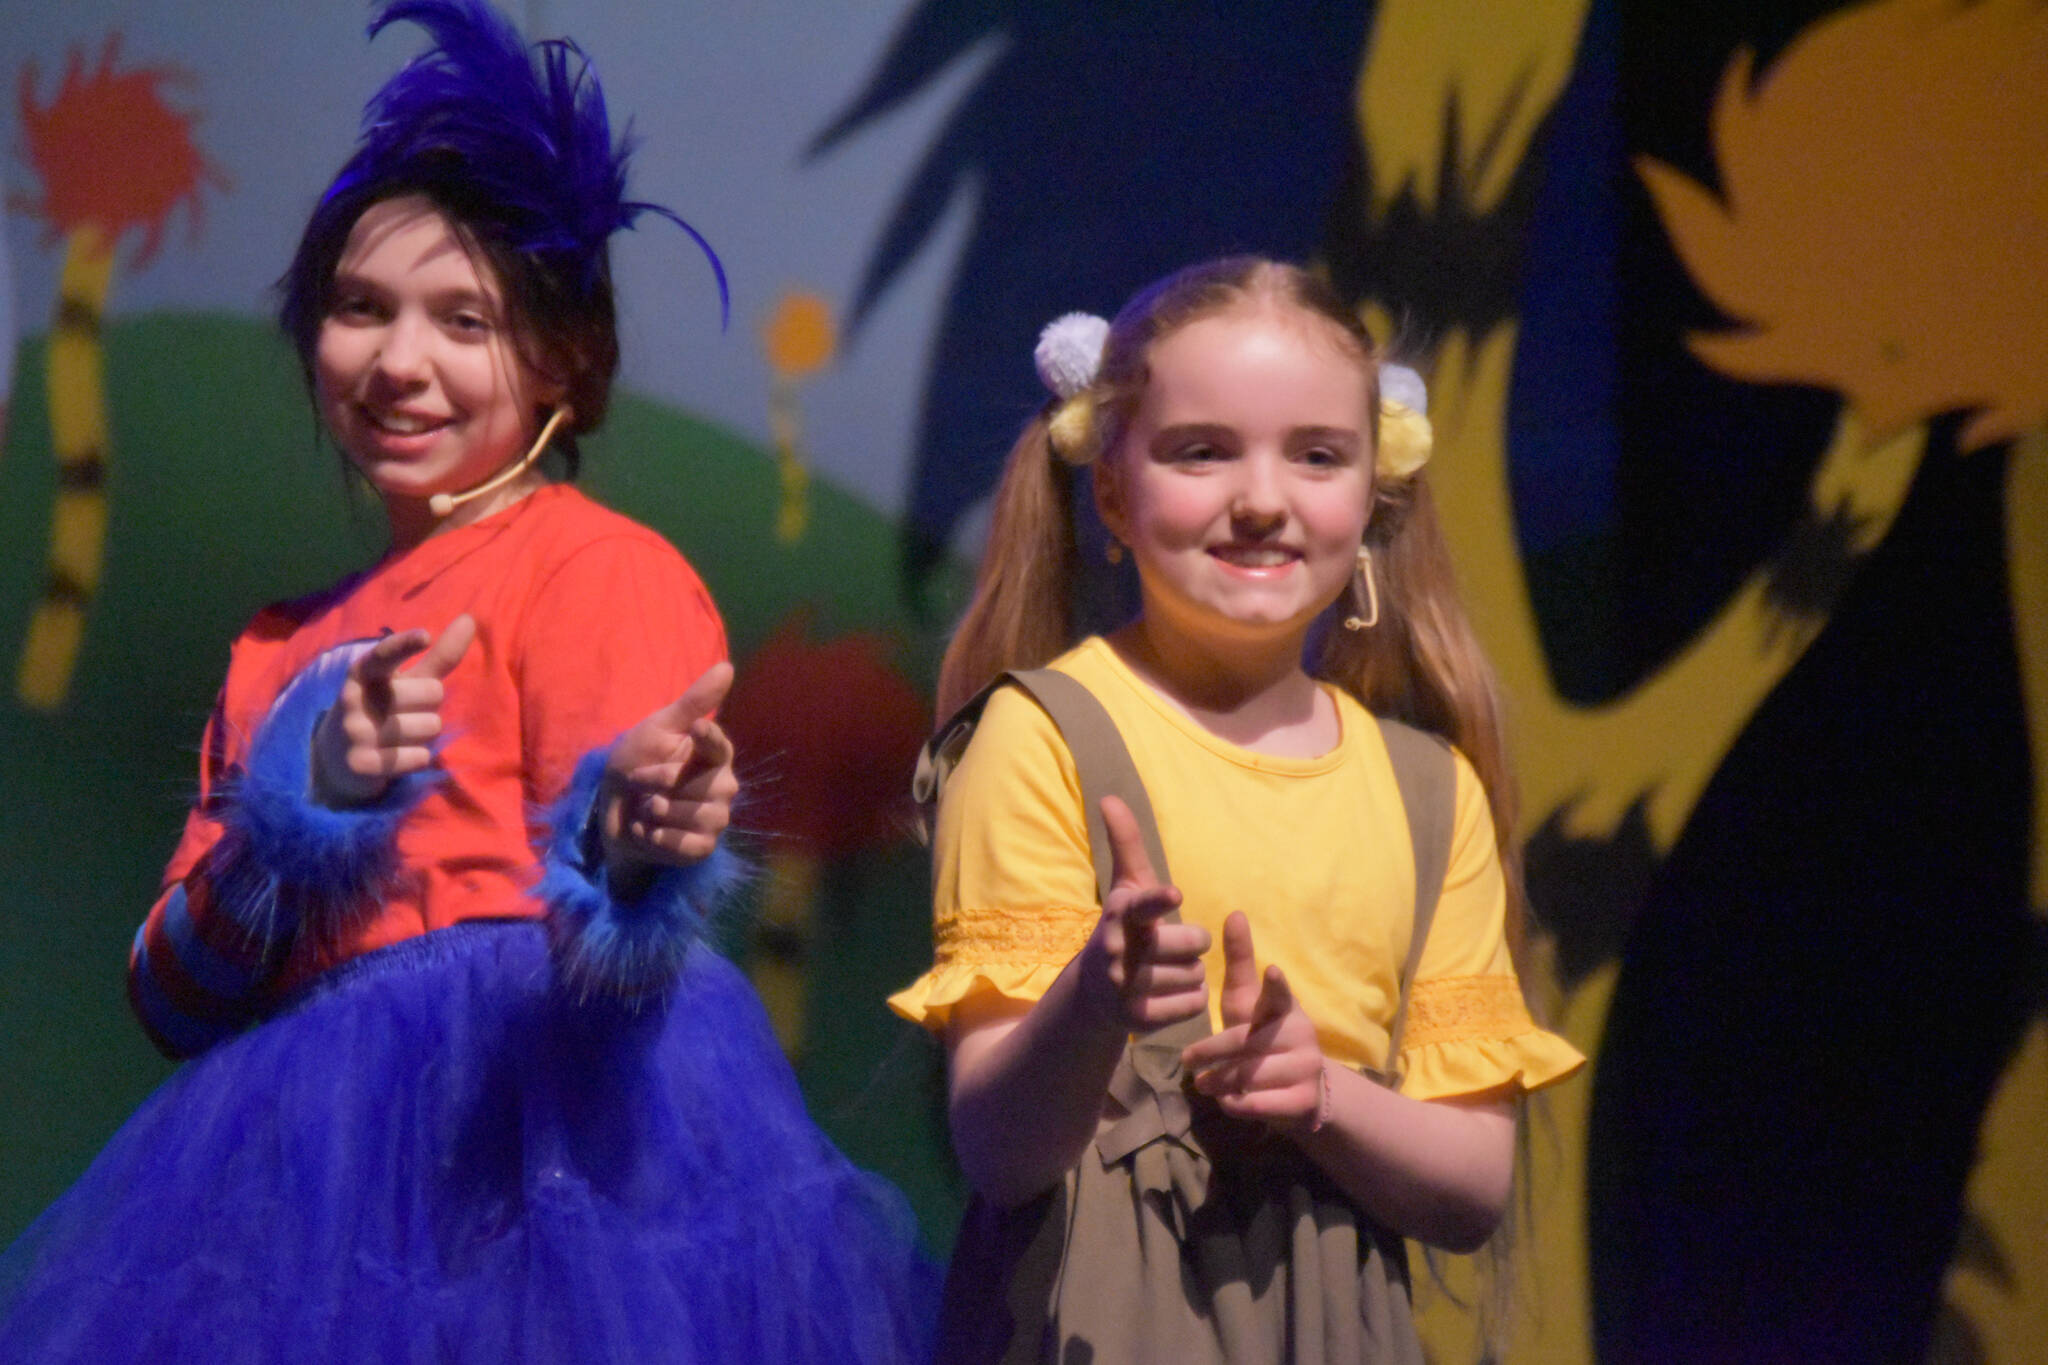 Morgan Hooper (right) and another member of Triumvirate Theatre’s production of “Seussical” rehearse on Wednesday, Feb. 8, 2023, in the Renee C. Henderson Auditorium at Kenai Central High School in Kenai, Alaska. (Jake Dye/Peninsula Clarion)